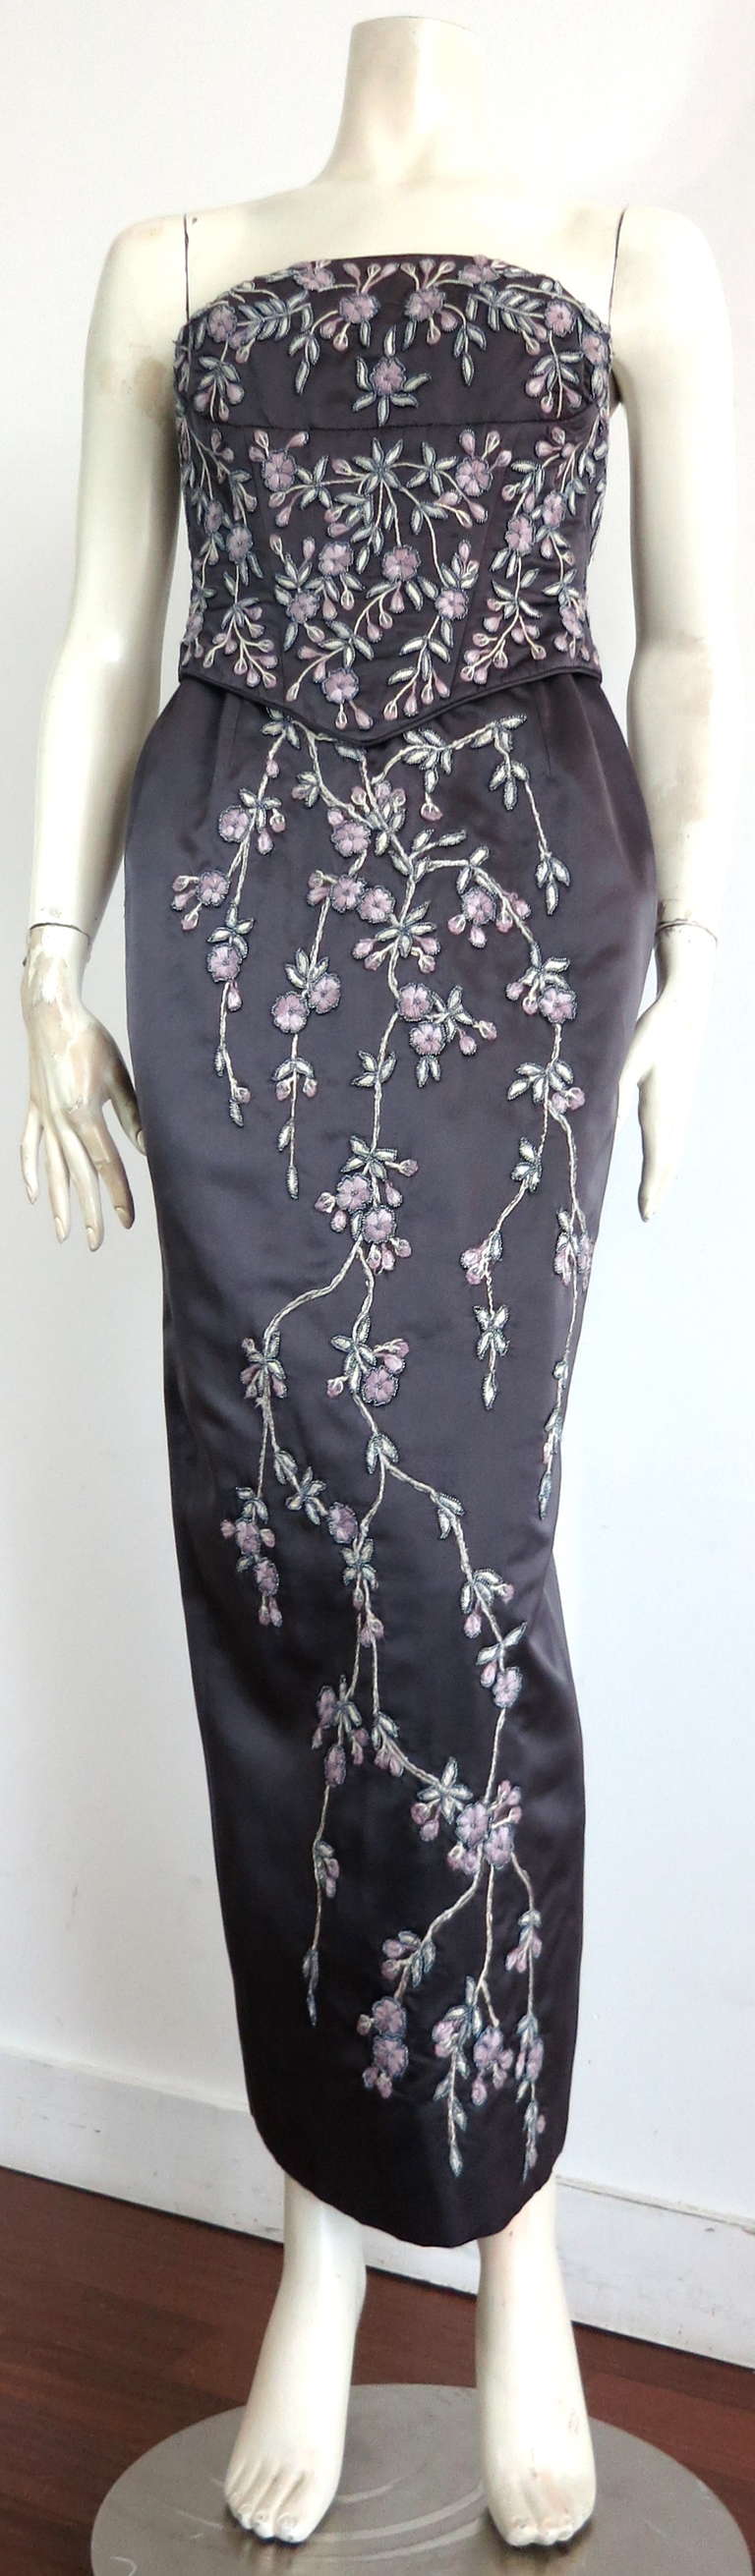 Gorgeous EAVIS & BROWN LONDON Embroidered satin evening dress.

This stunning dress was designed by Eavis & Brown in England during the 1980's.

Luxurious duchess silk satin base fabric in dark gray with purple tone.

Pale lavender and